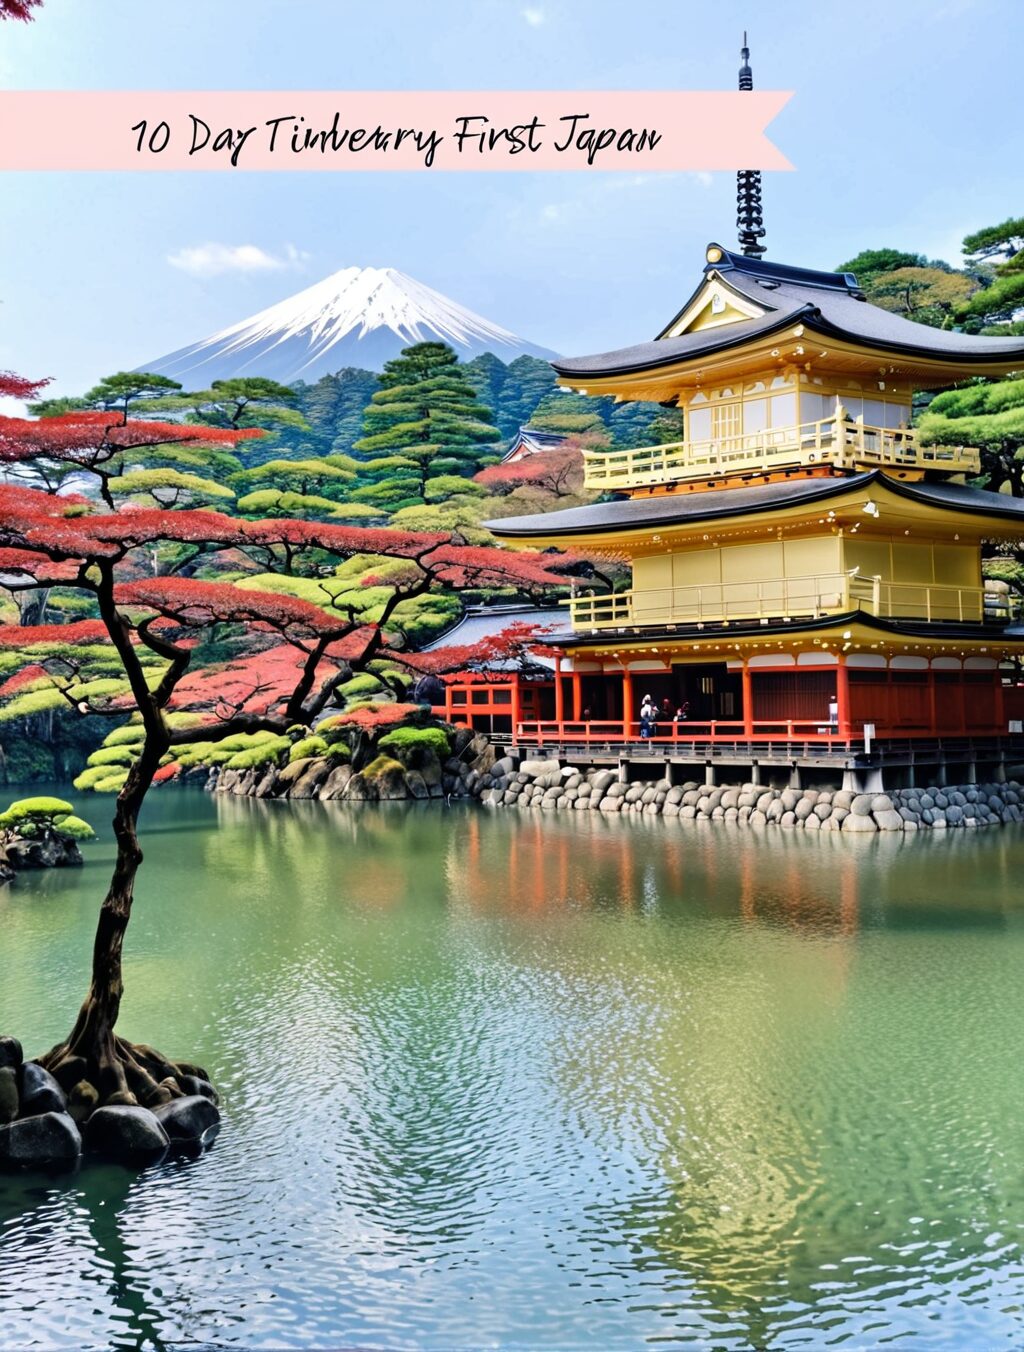 10 day itinerary japan first time